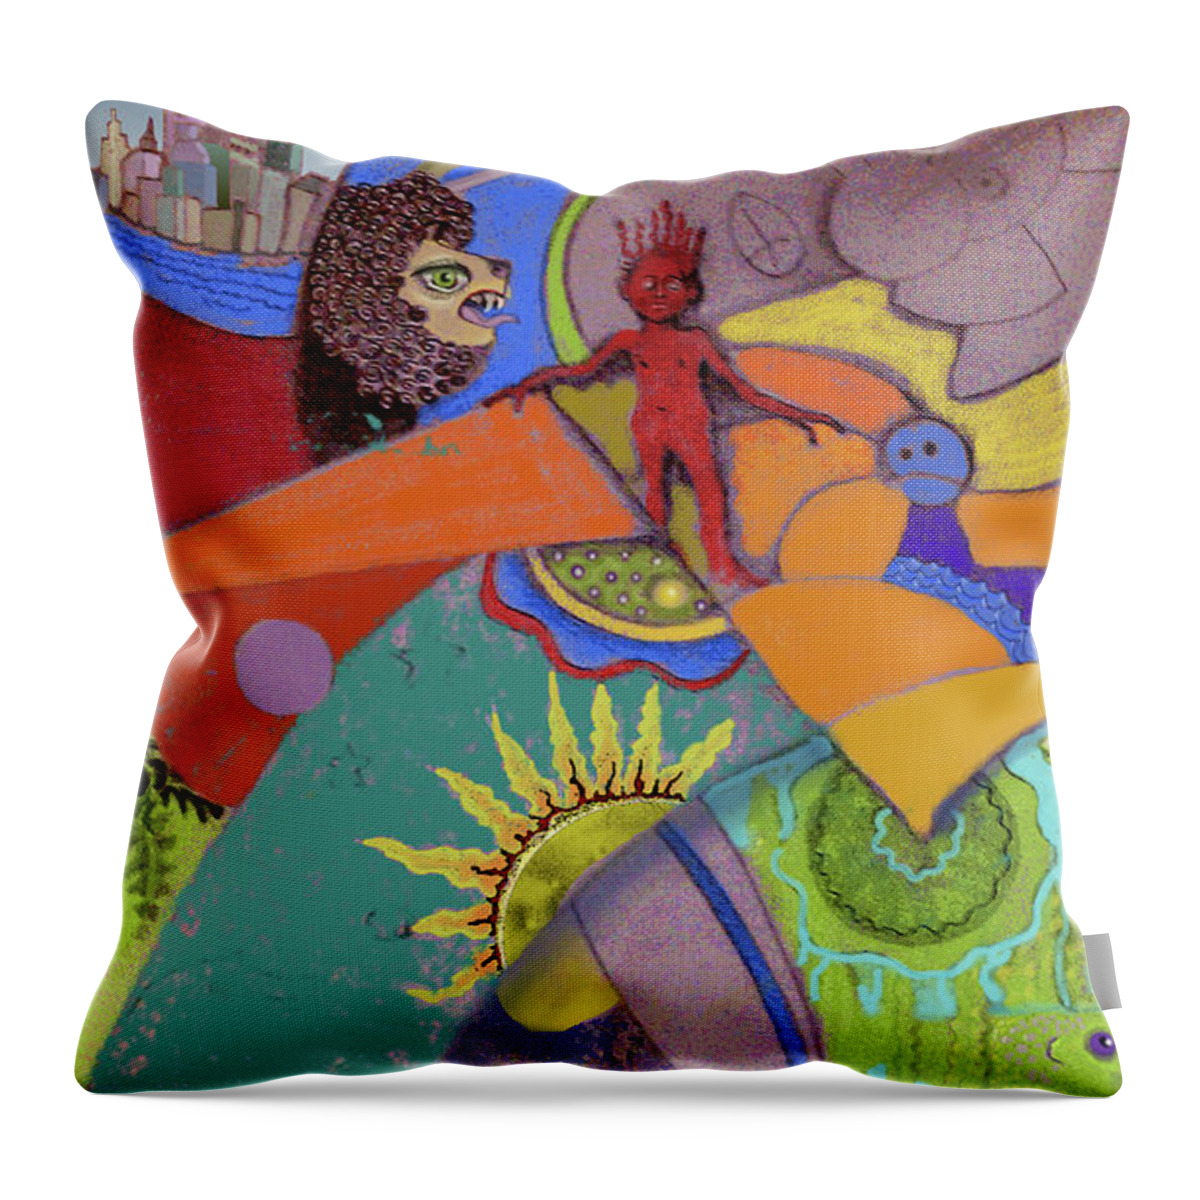 World Throw Pillow featuring the digital art World View by Carol Jacobs